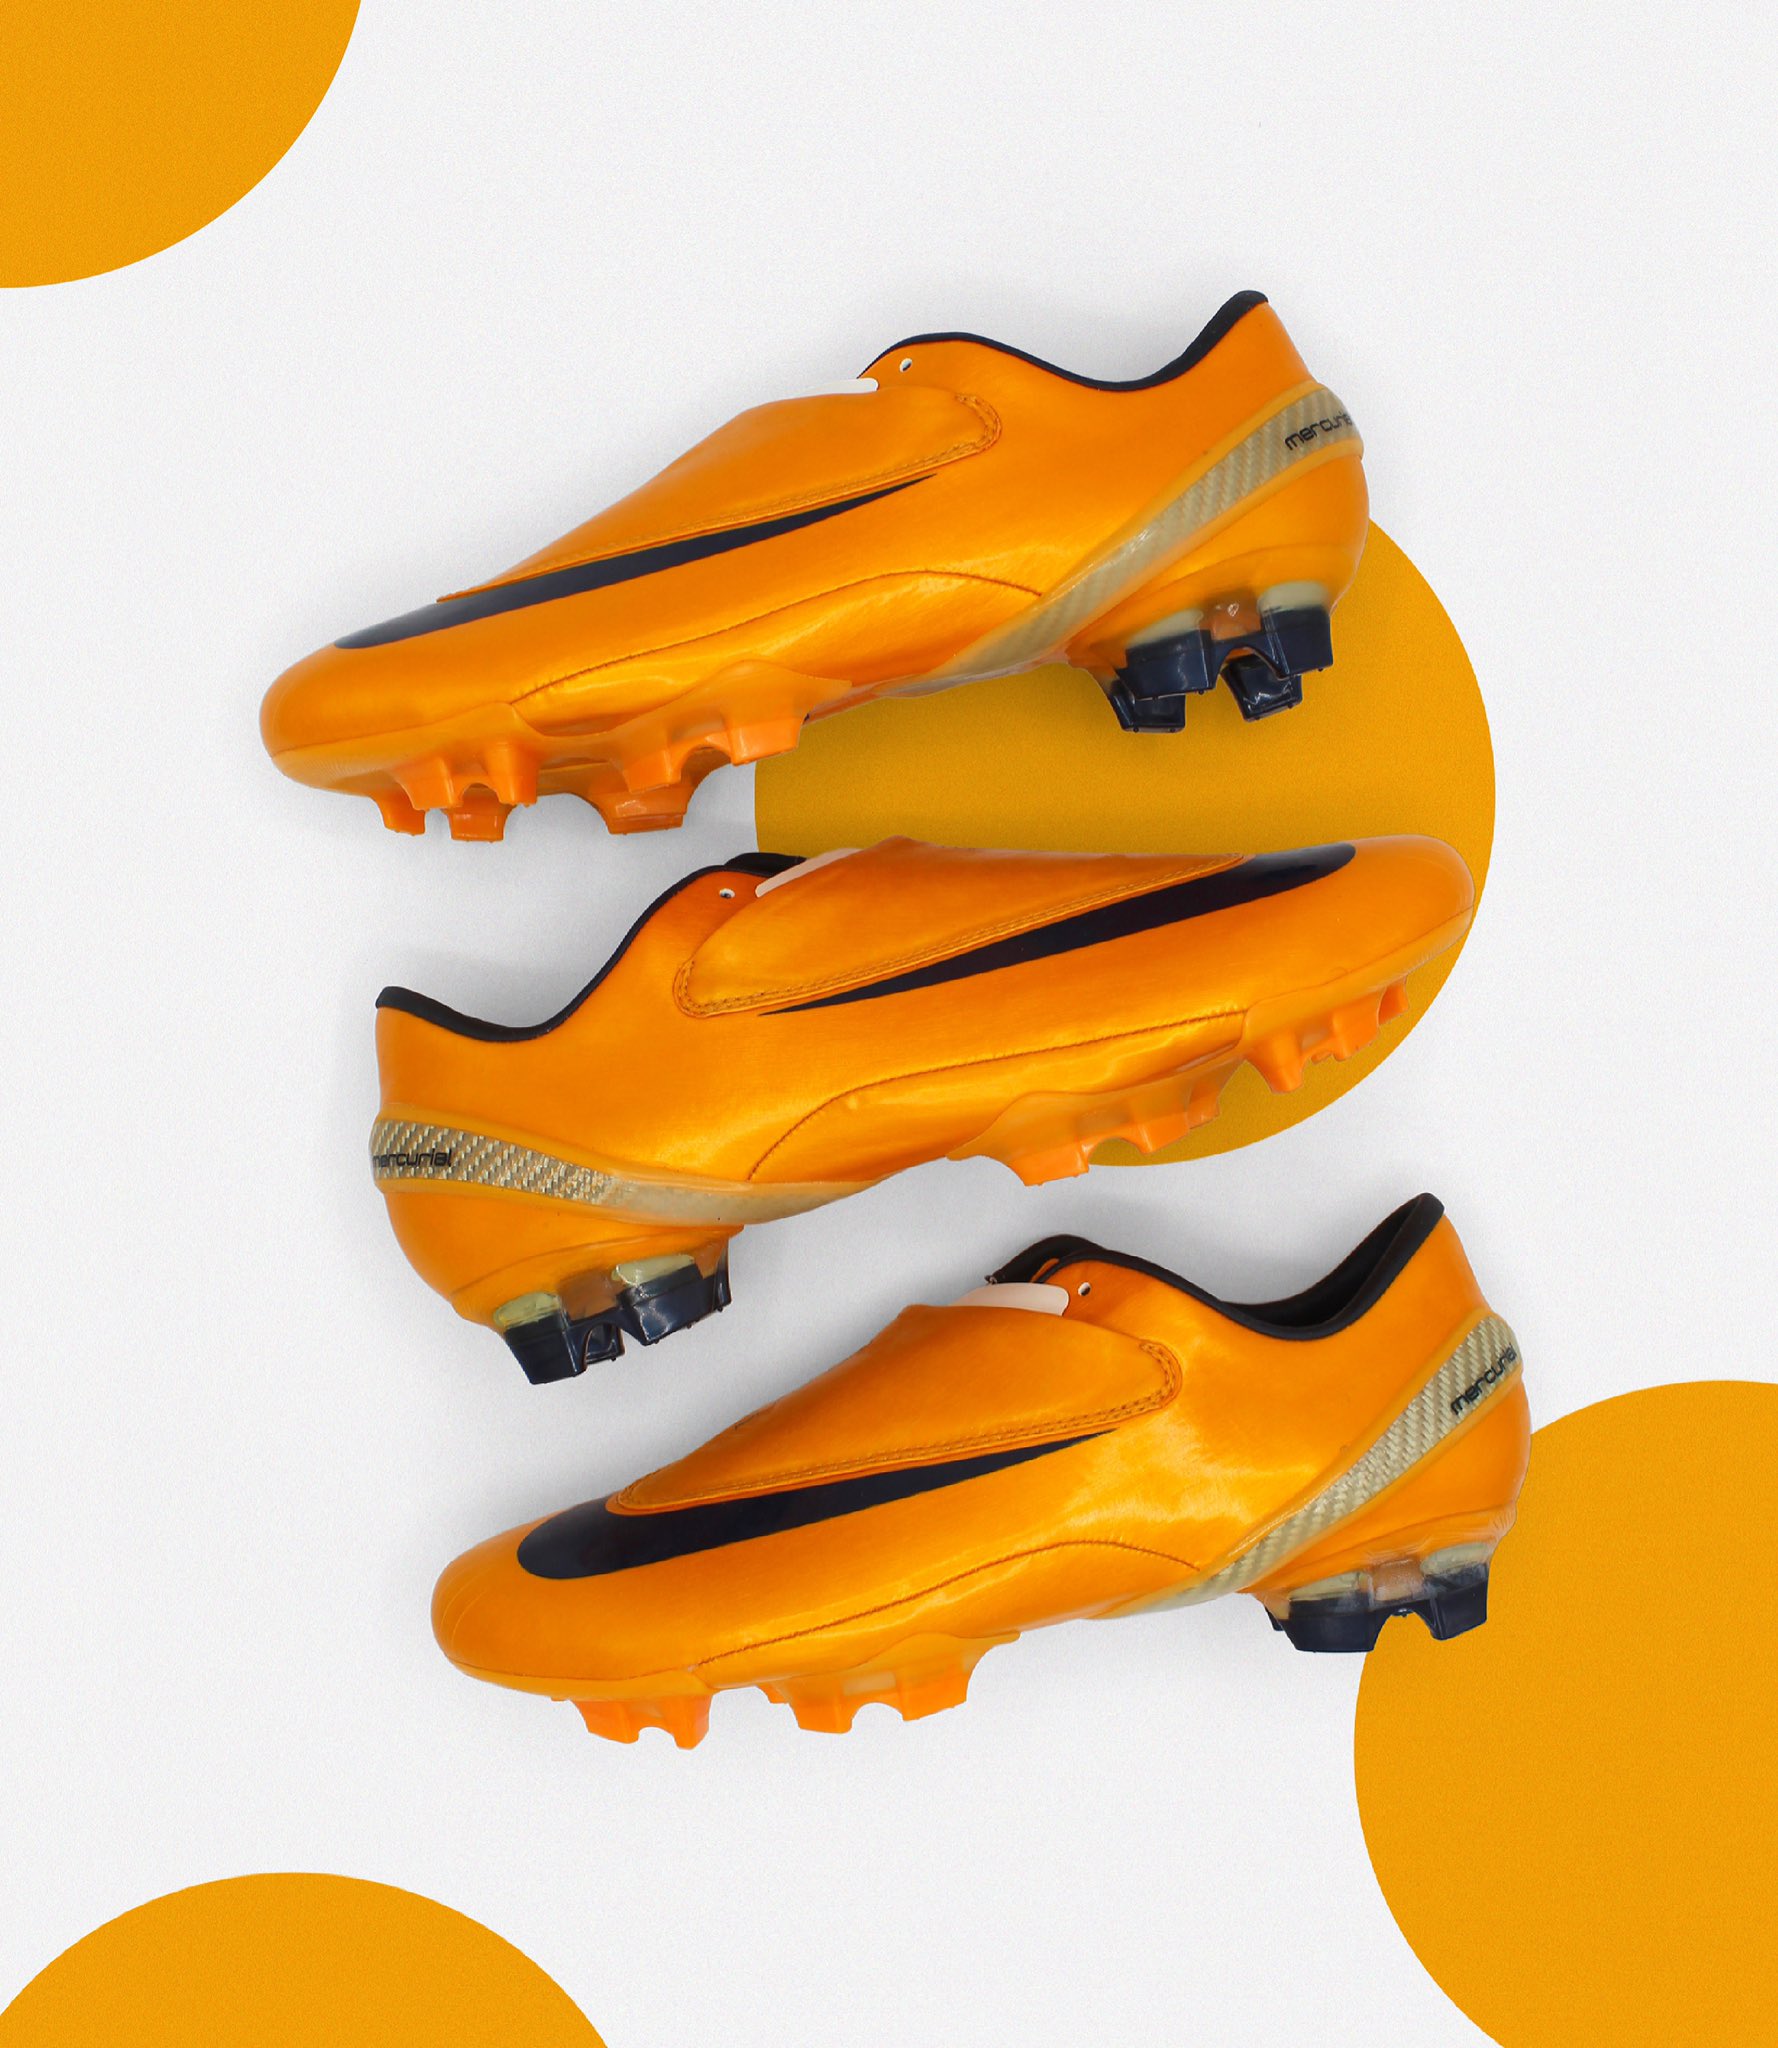 Classic Boots Matter en Twitter: "#Mercurial Vapor 2007/08 Vibes Who the player that comes to mind? #nikemercurial https://t.co/MFBBL4zkML" / Twitter